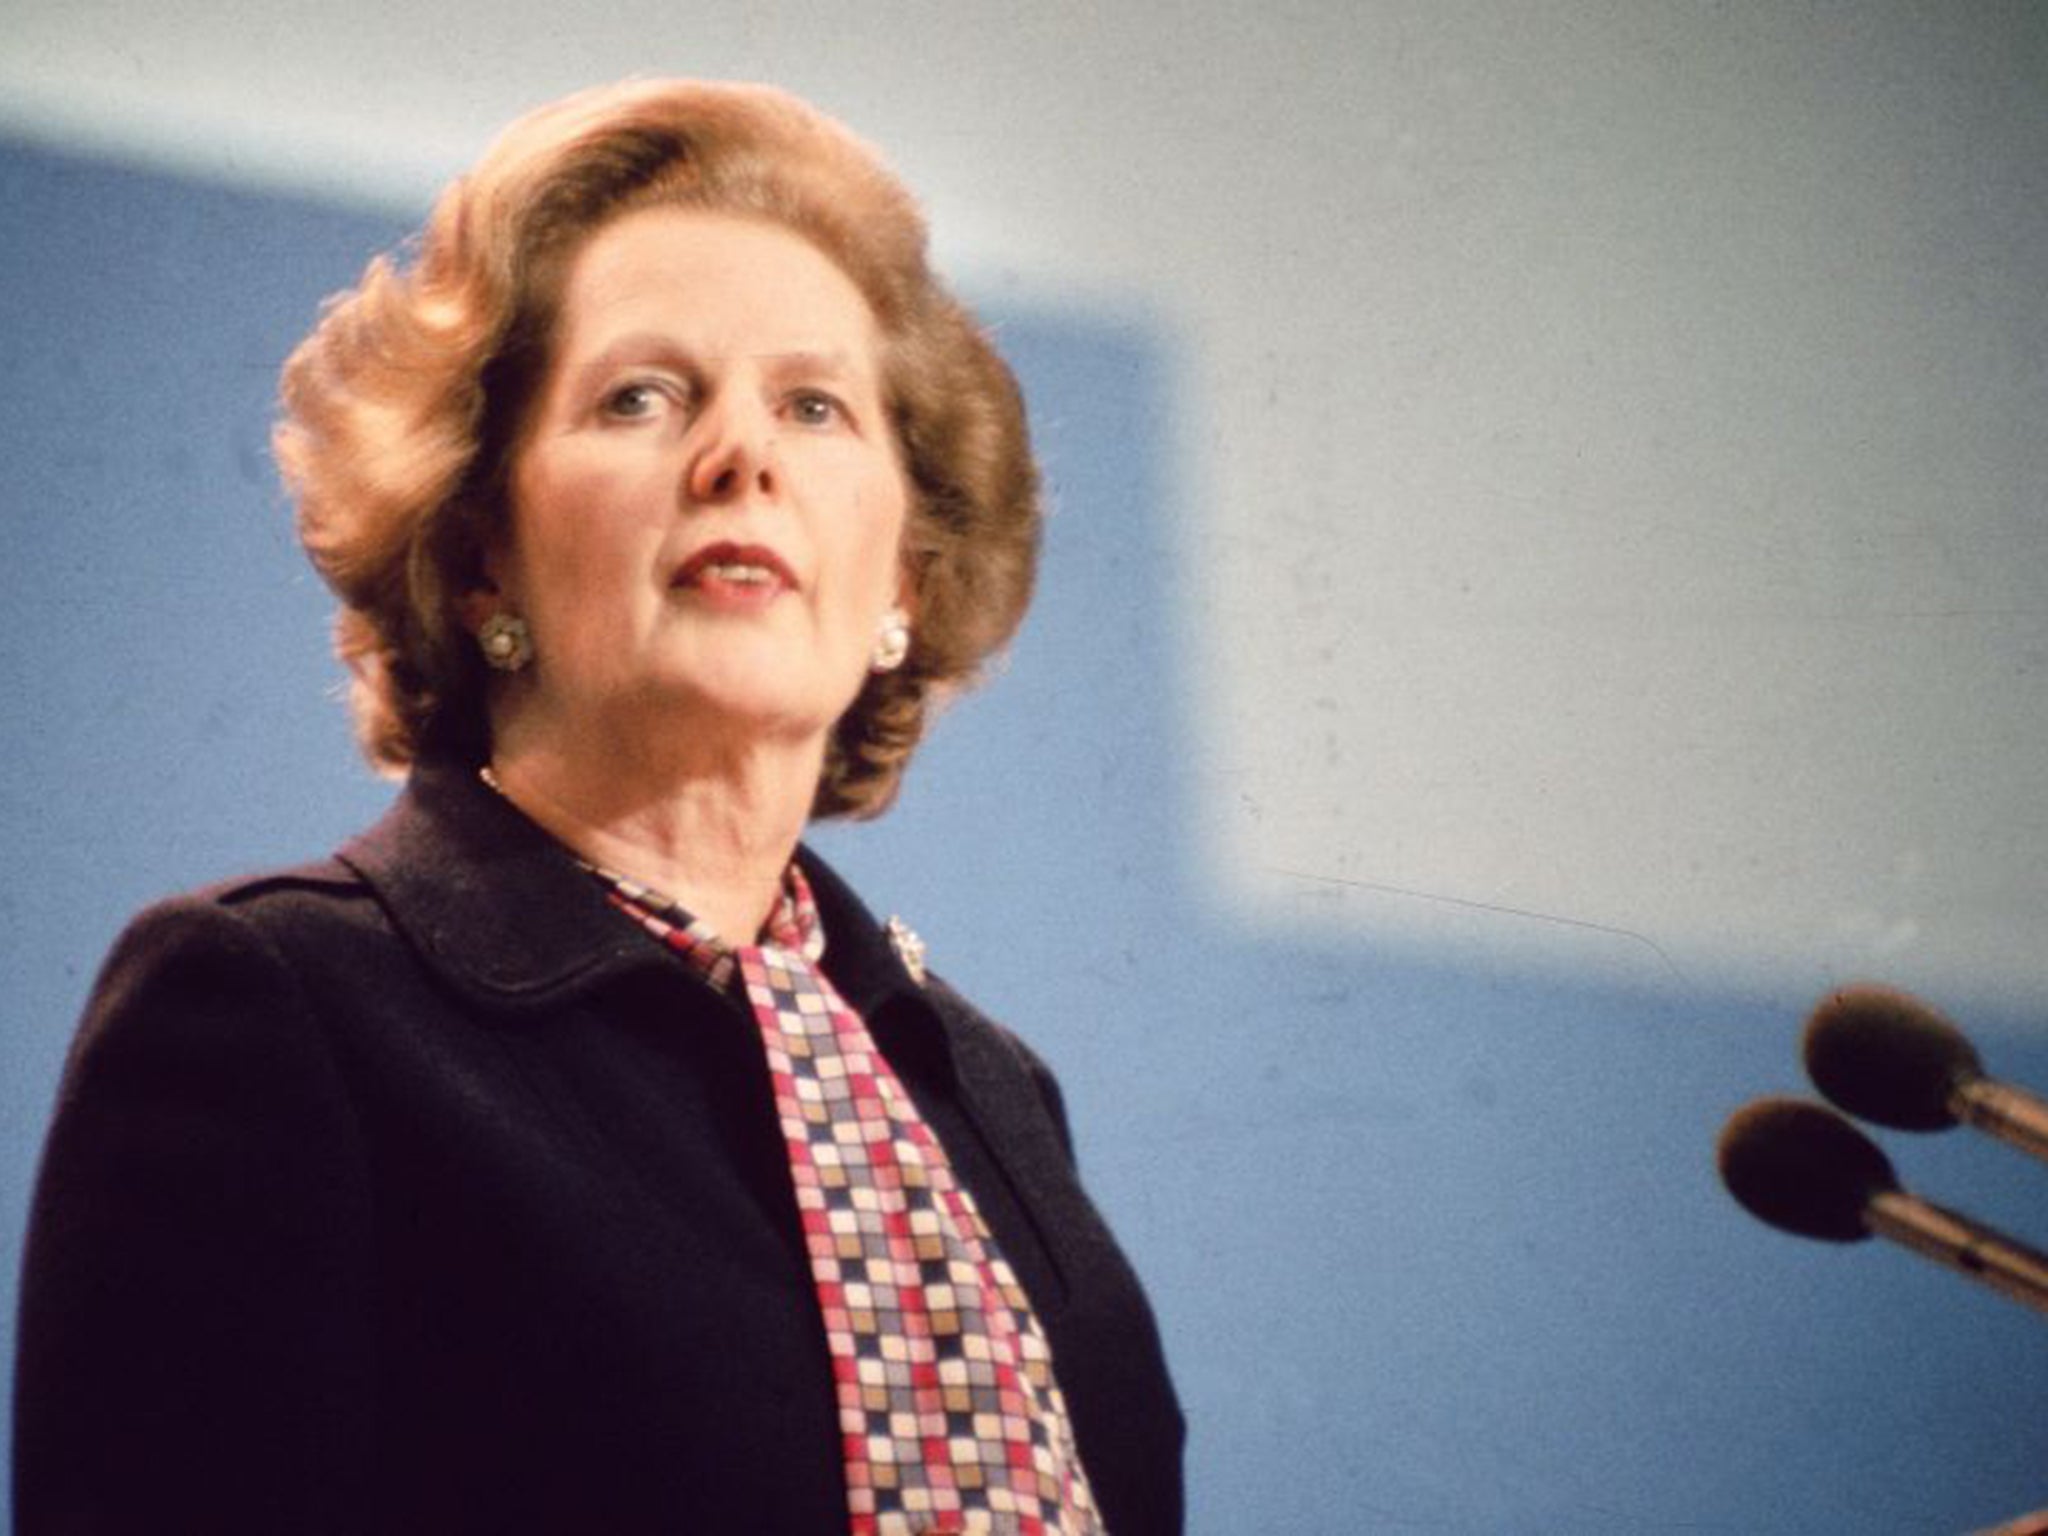 In 1979 Margaret Thatcher considered commercialising parts of the BBC corporation as it struggled to keep its costs down